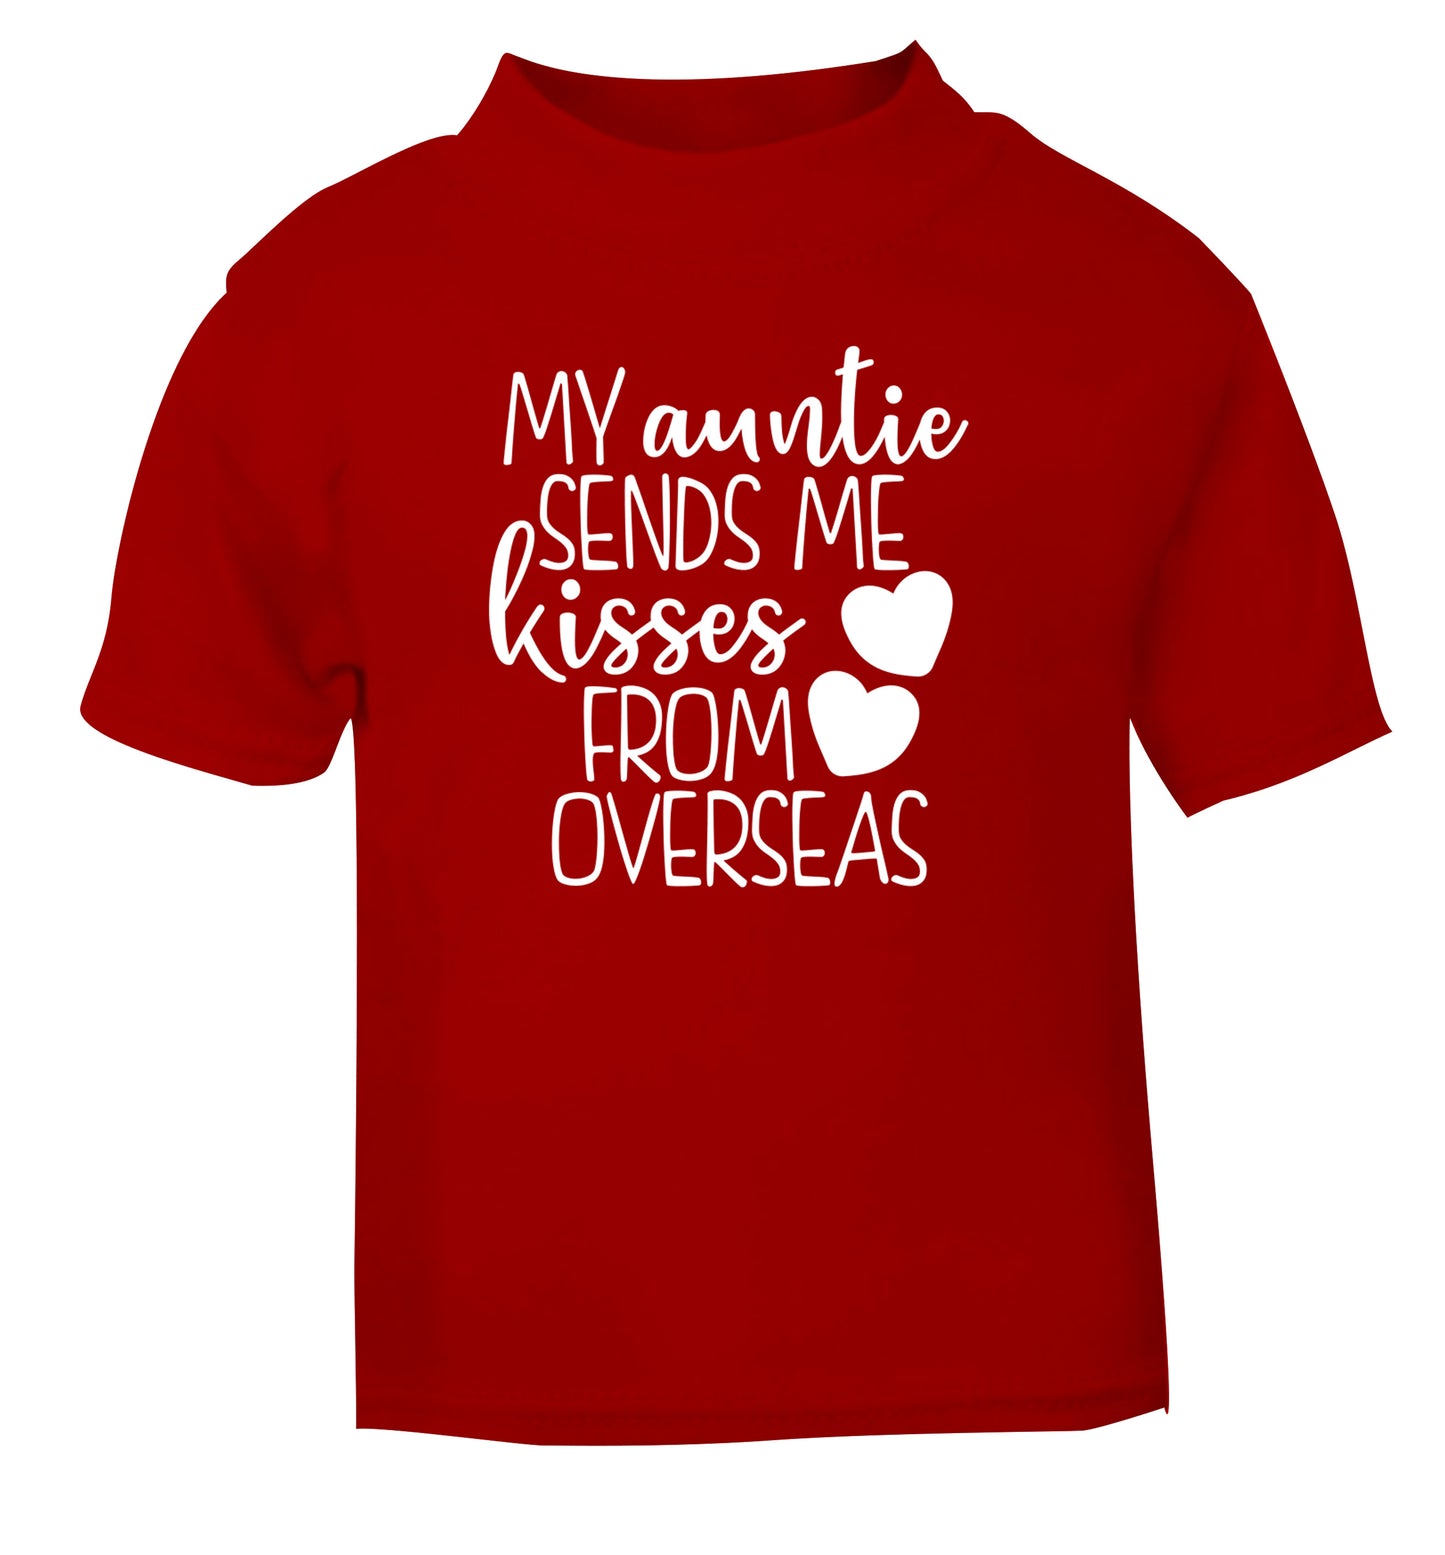 My auntie sends me kisses from overseas red Baby Toddler Tshirt 2 Years